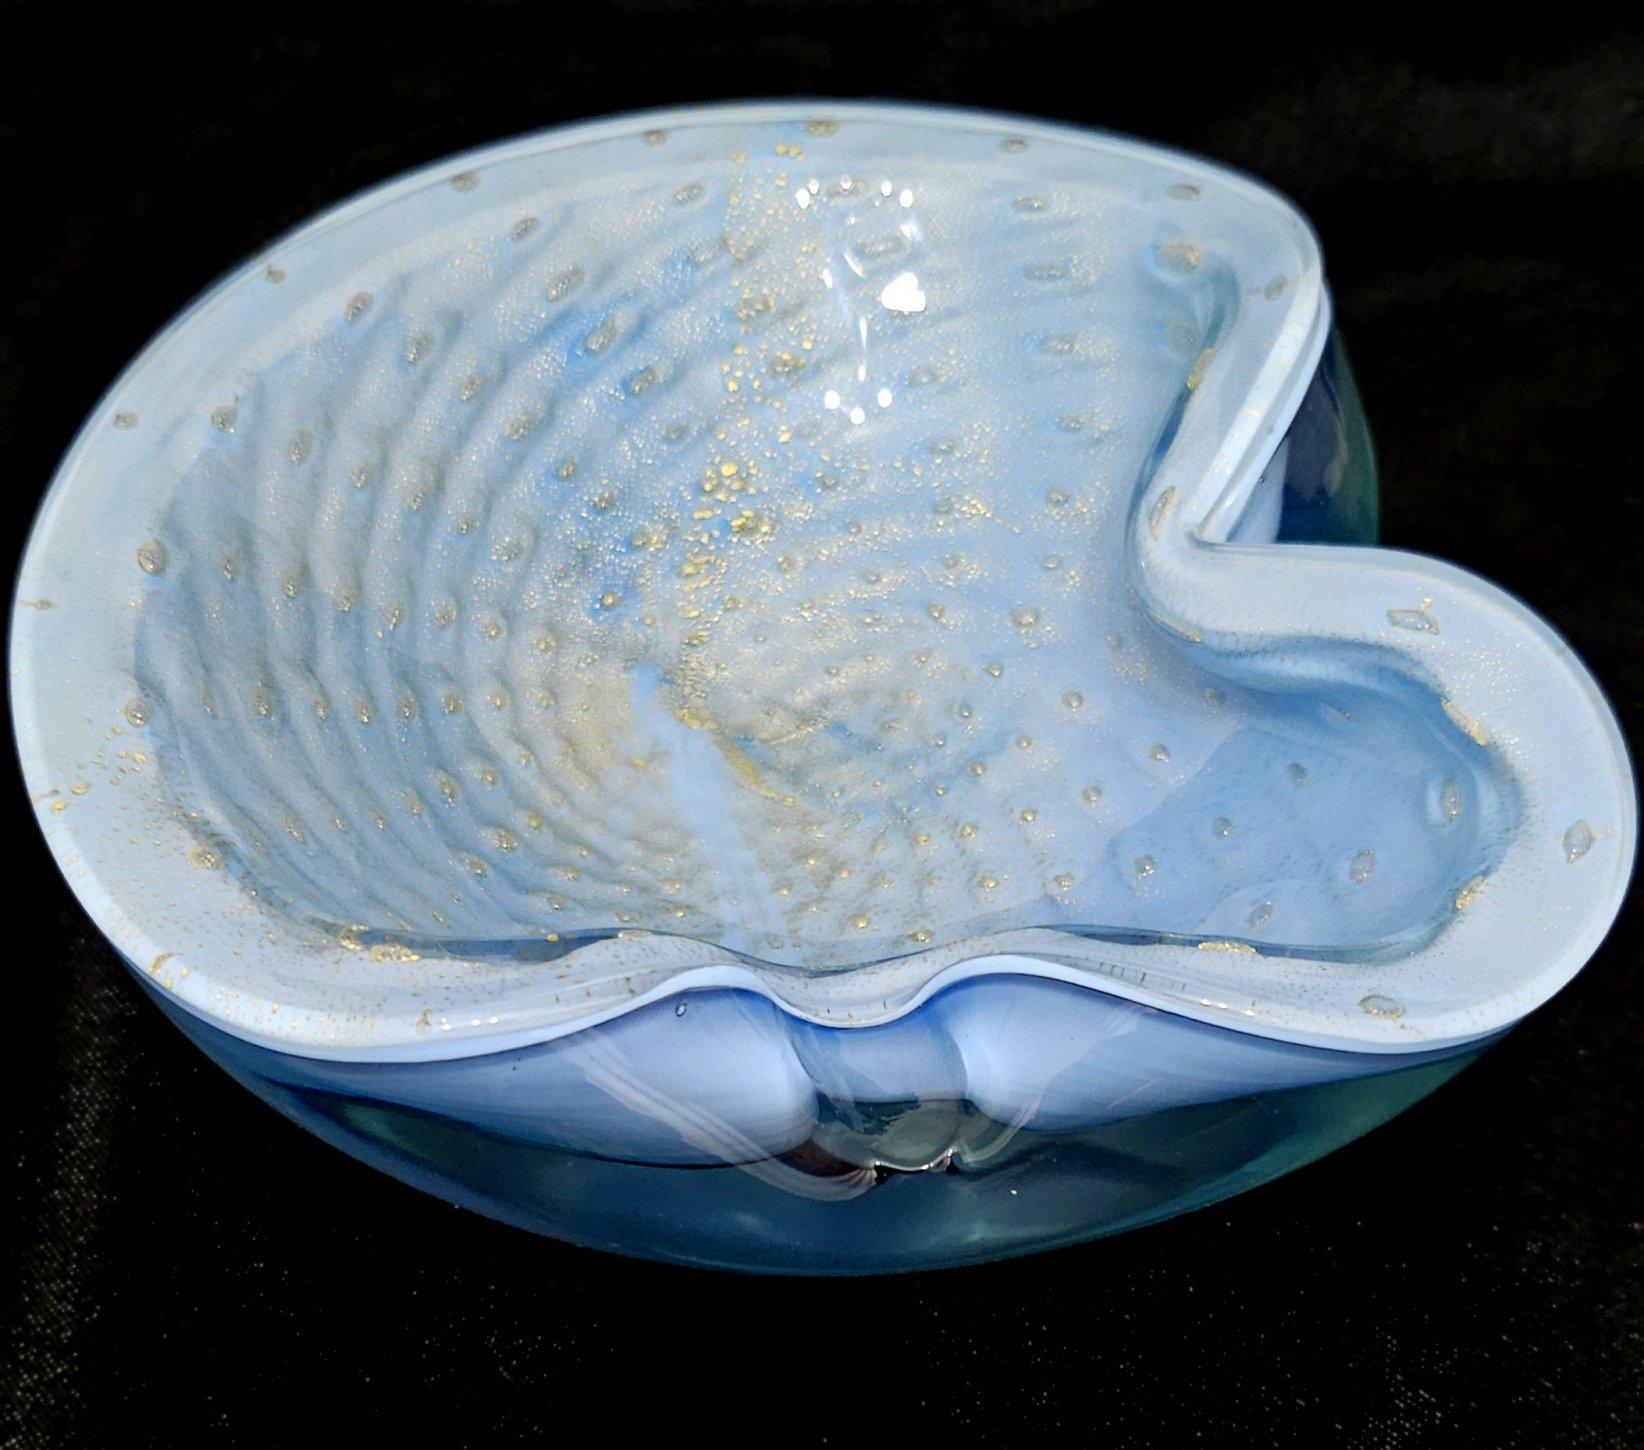 Murano Glass Bullicante Bowl / Vide Poche with Gold Polveri, Alfredo Barbini (likely)
Very much like Barbini's work; there are one or two other maestros of that era who made similar works, but we're assuming Barbini, acknowleding that we can't